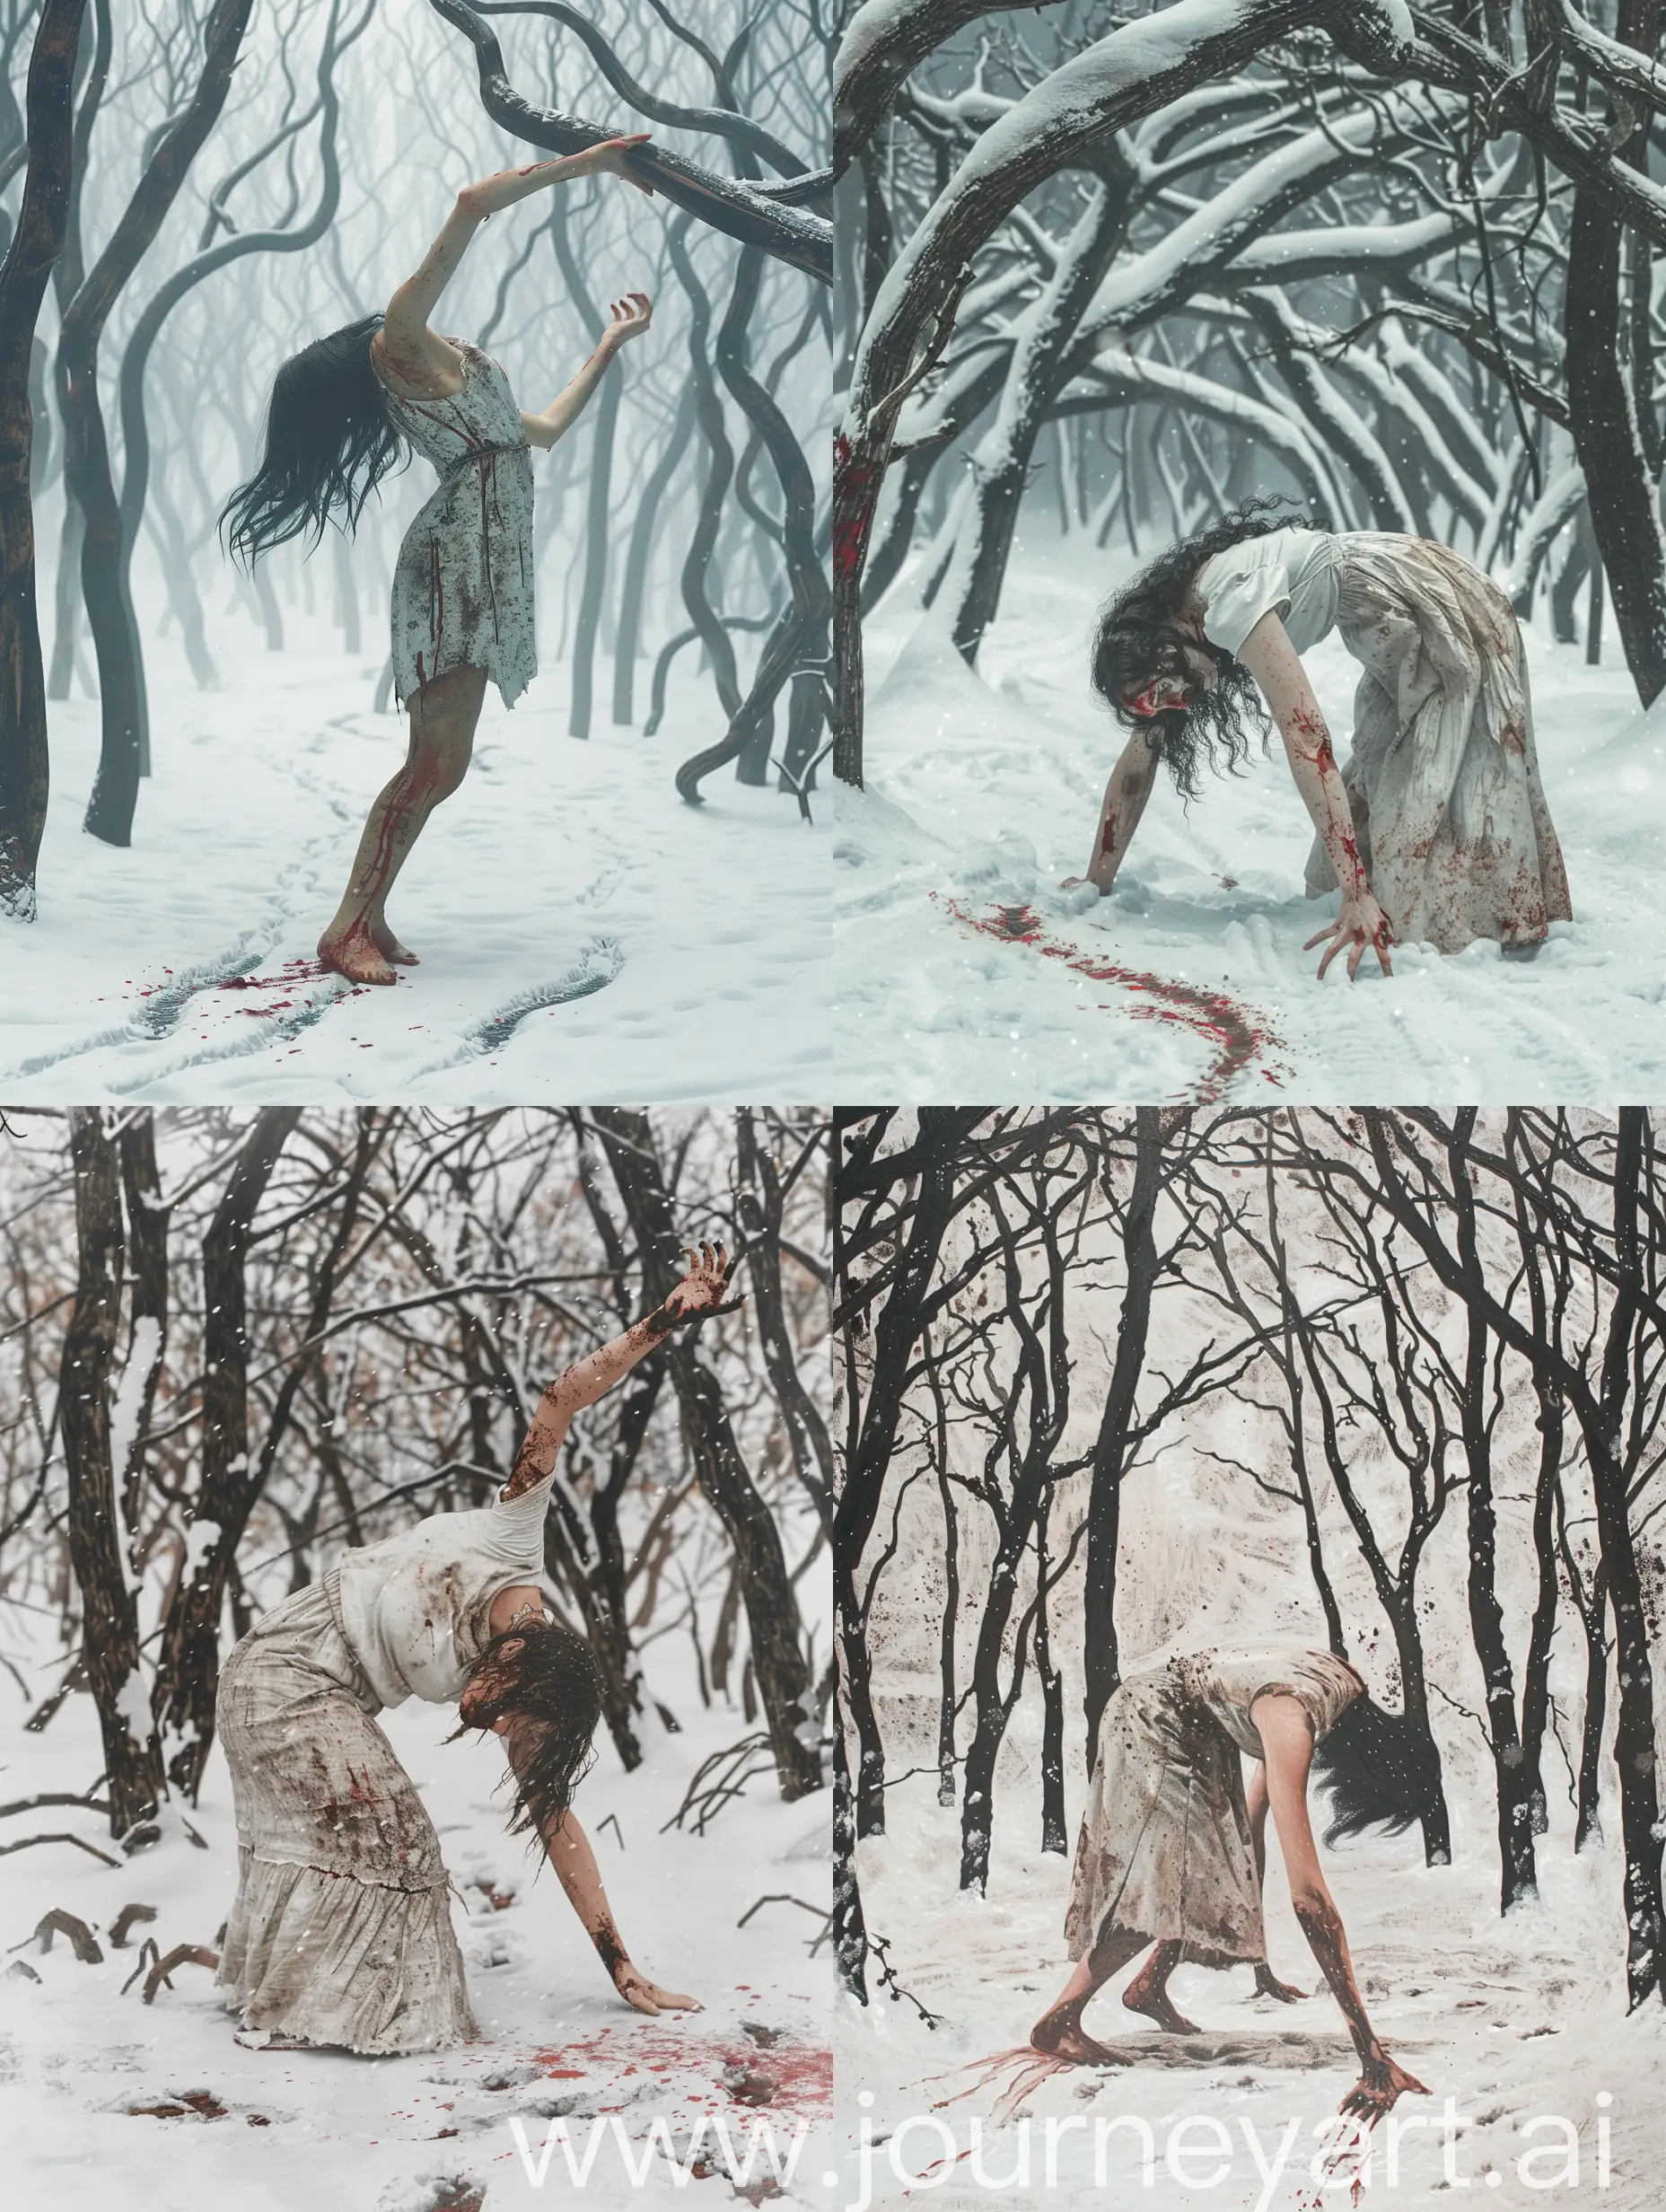 Create a dark horror piece that captures the terror and agony of a possessed woman in a snowy forest.
- The woman should be in a tonic posture, bending backward with her arms and head extended, as if tormented by an unseen force.
- The woman’s attire should be torn, dirty, and bloody, creating a disturbing contrast with the white snow and the bare trees.
- The trees should have twisted branches that create menacing shapes against the gloomy sky. The snow should be stained with blood and footprints.
- The piece should convey a sense of dread, pain, and despair, as the person suffers the wrath of the demon.